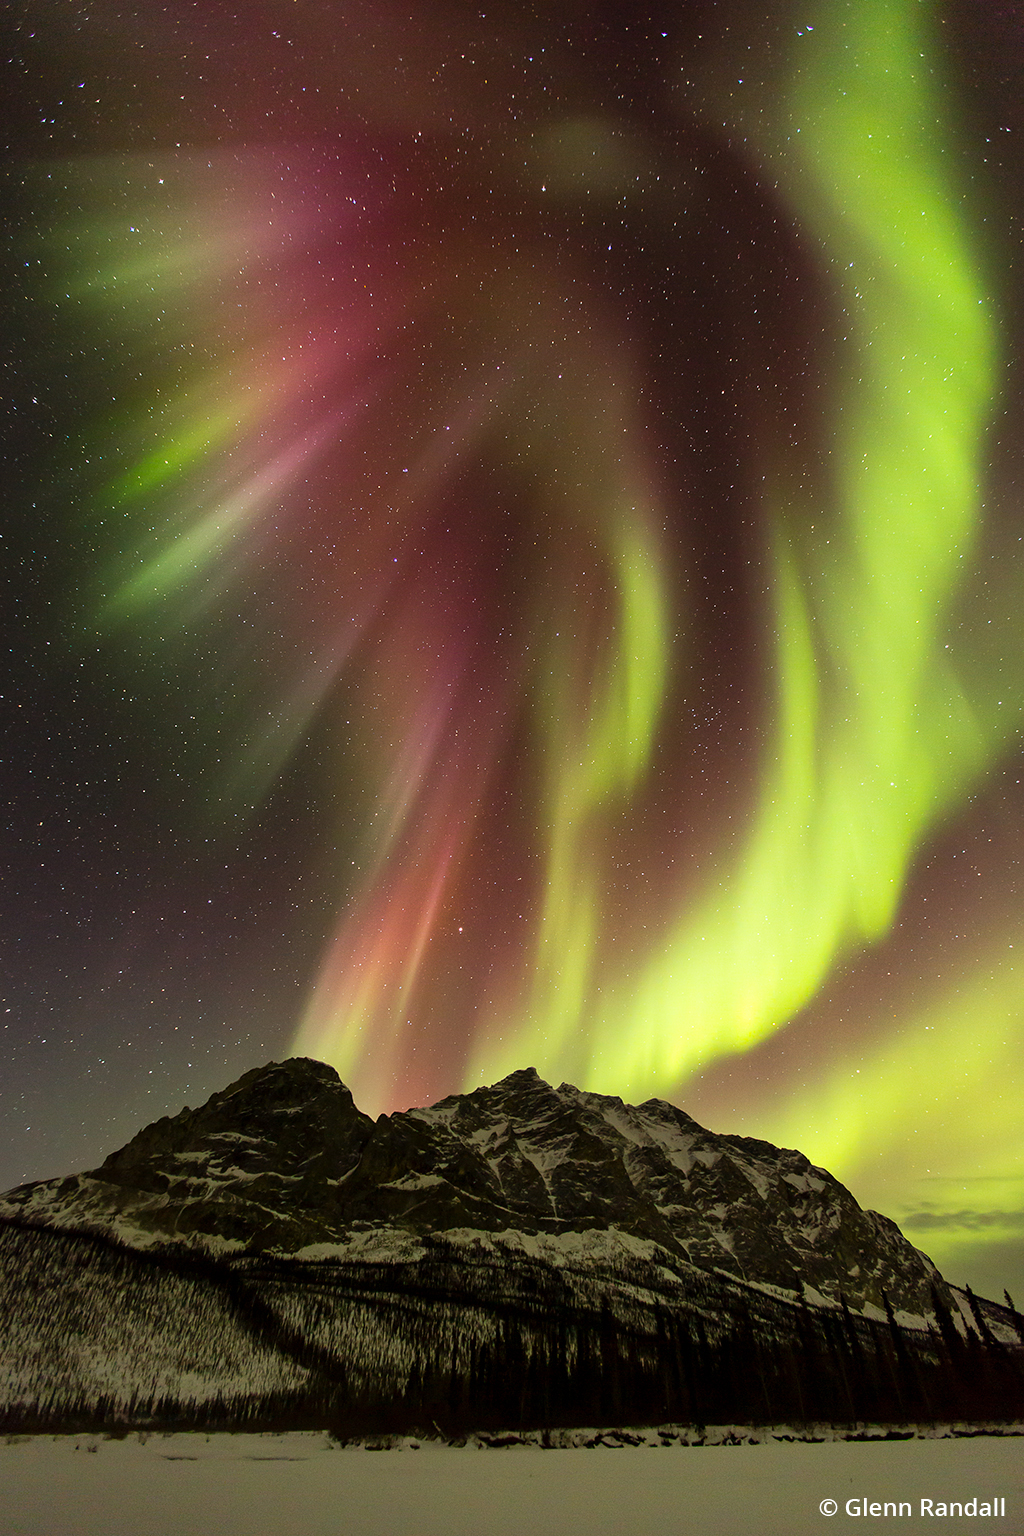 Image of the northern lights over Sukakpak Mountain